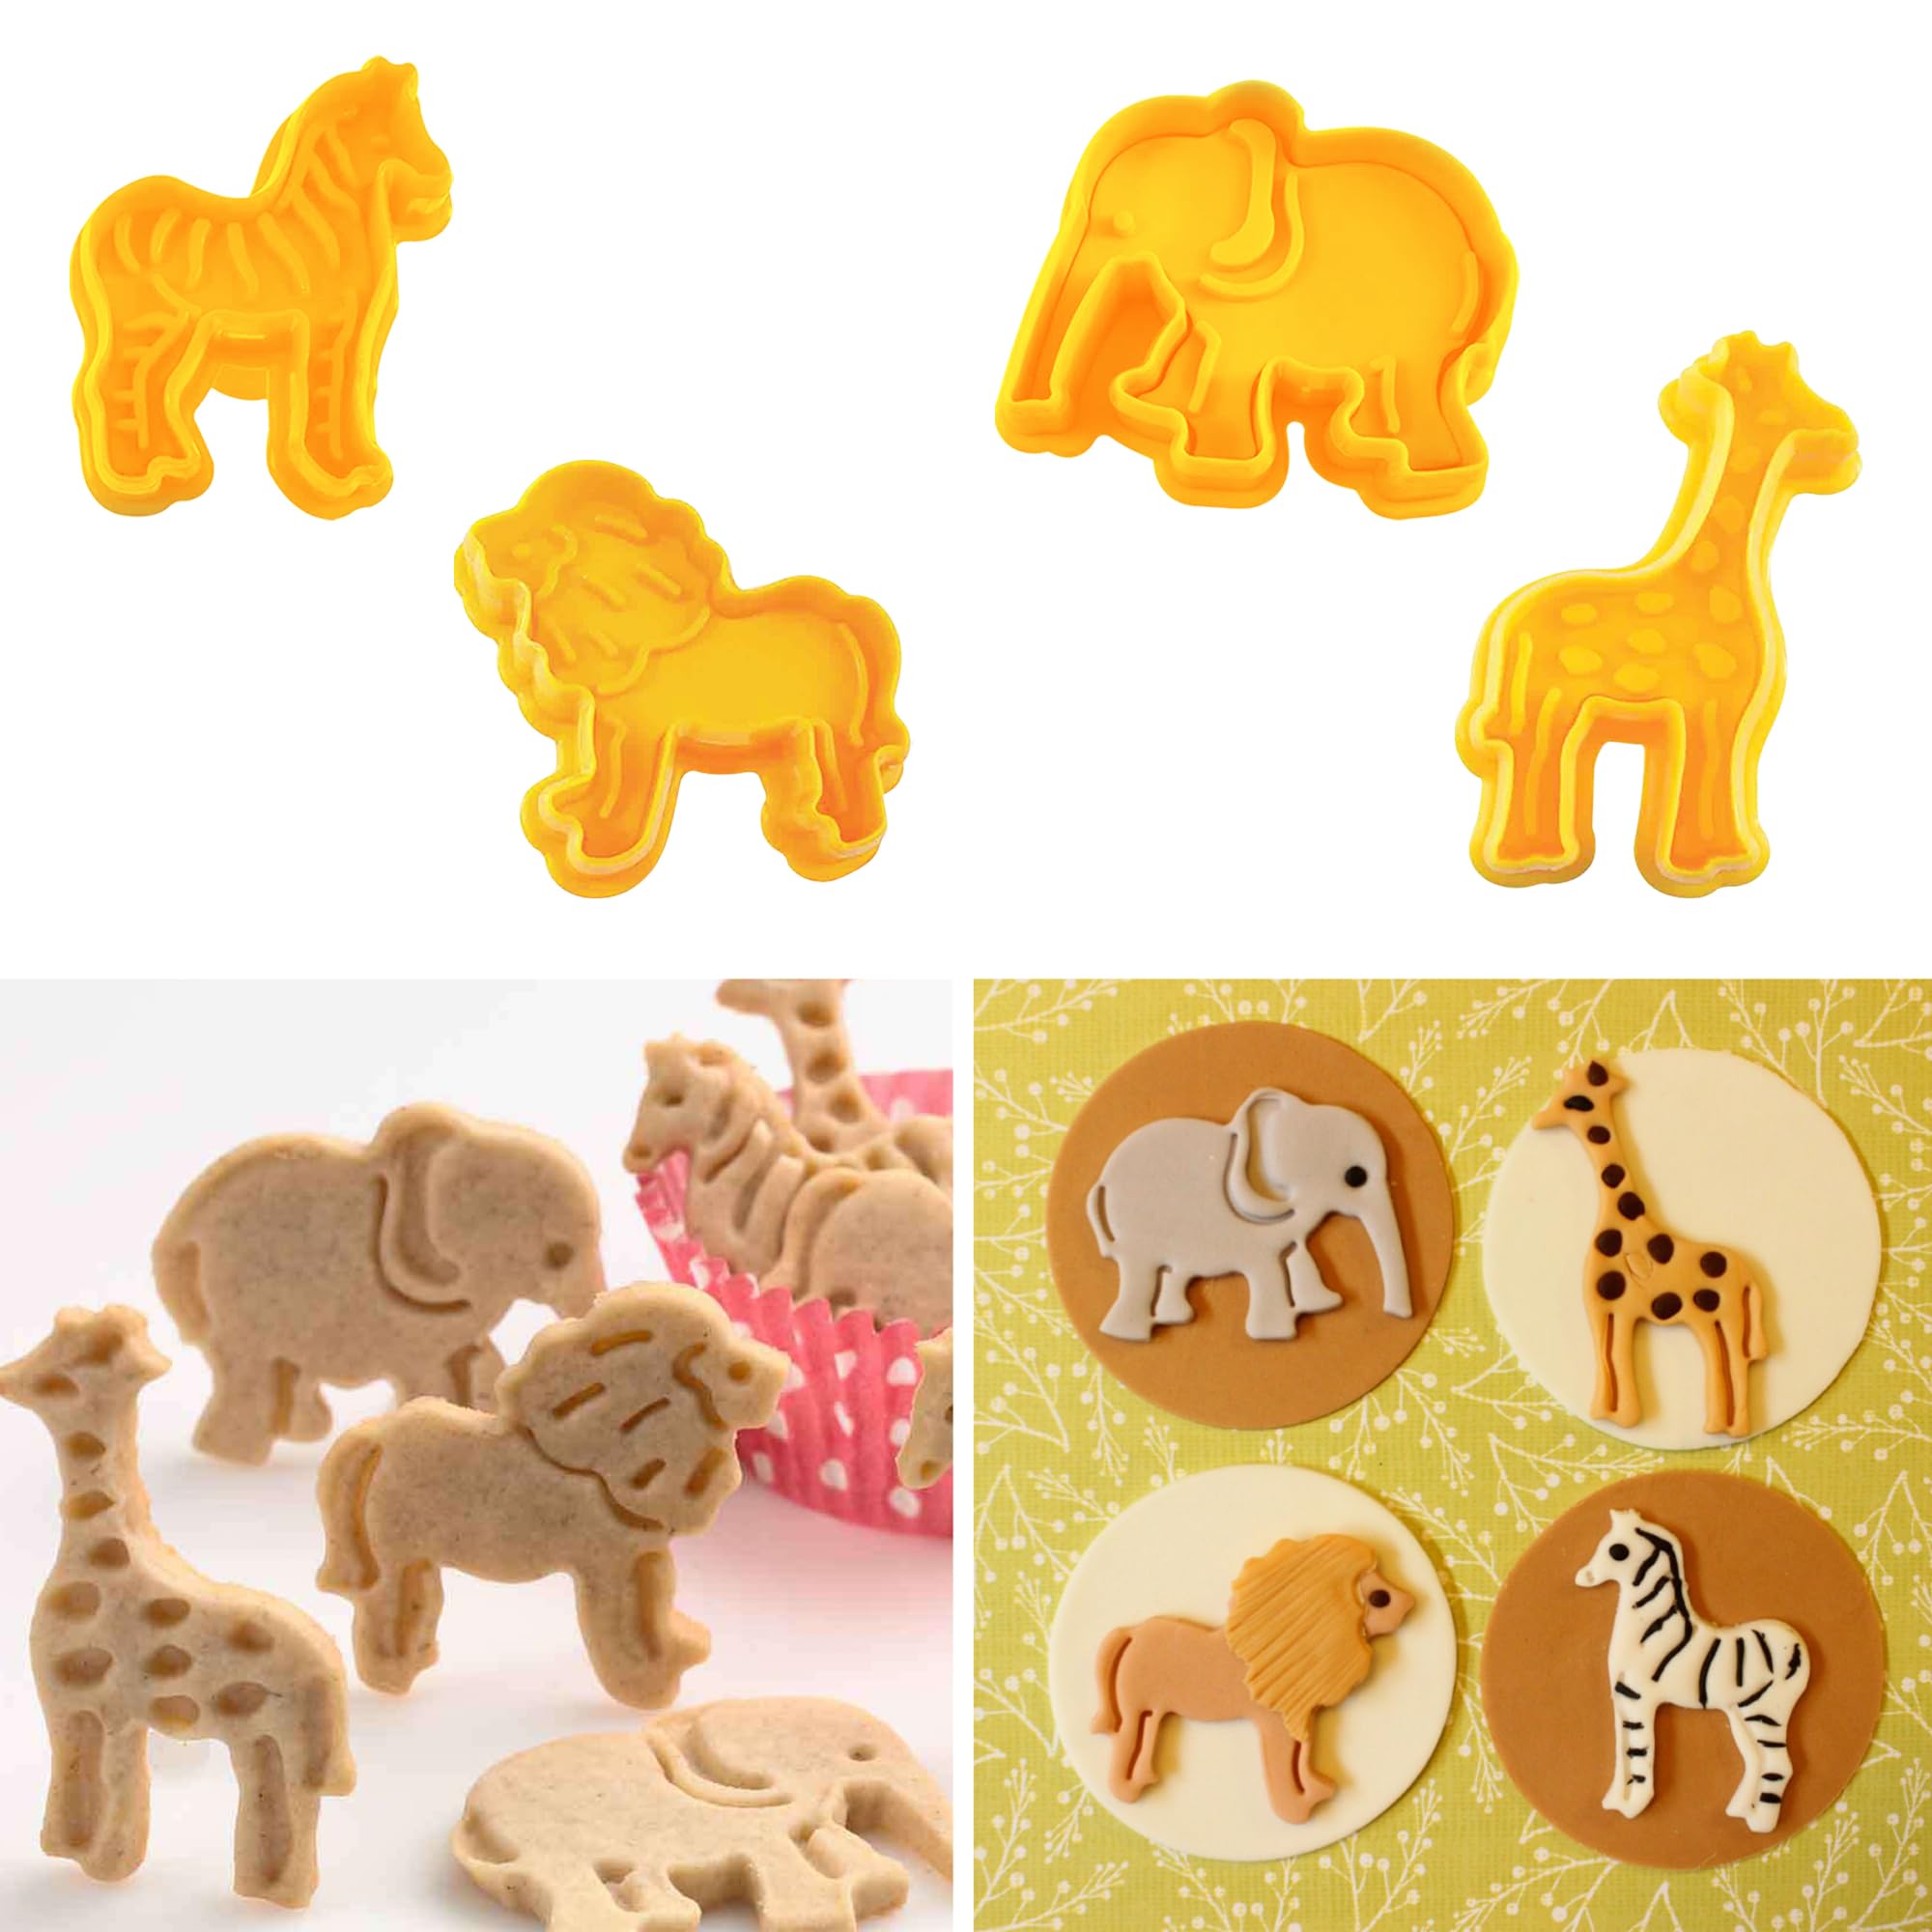 4-Piece Set Animal Cookie Cutters | Zoo Animals Cookie Cutters | Fondant Cutters Shapes | Perfect for Baking | Elephant, Giraffe, Lion, Zebra Shapes Cookie Cutter | DIY Baking Mold for Kids